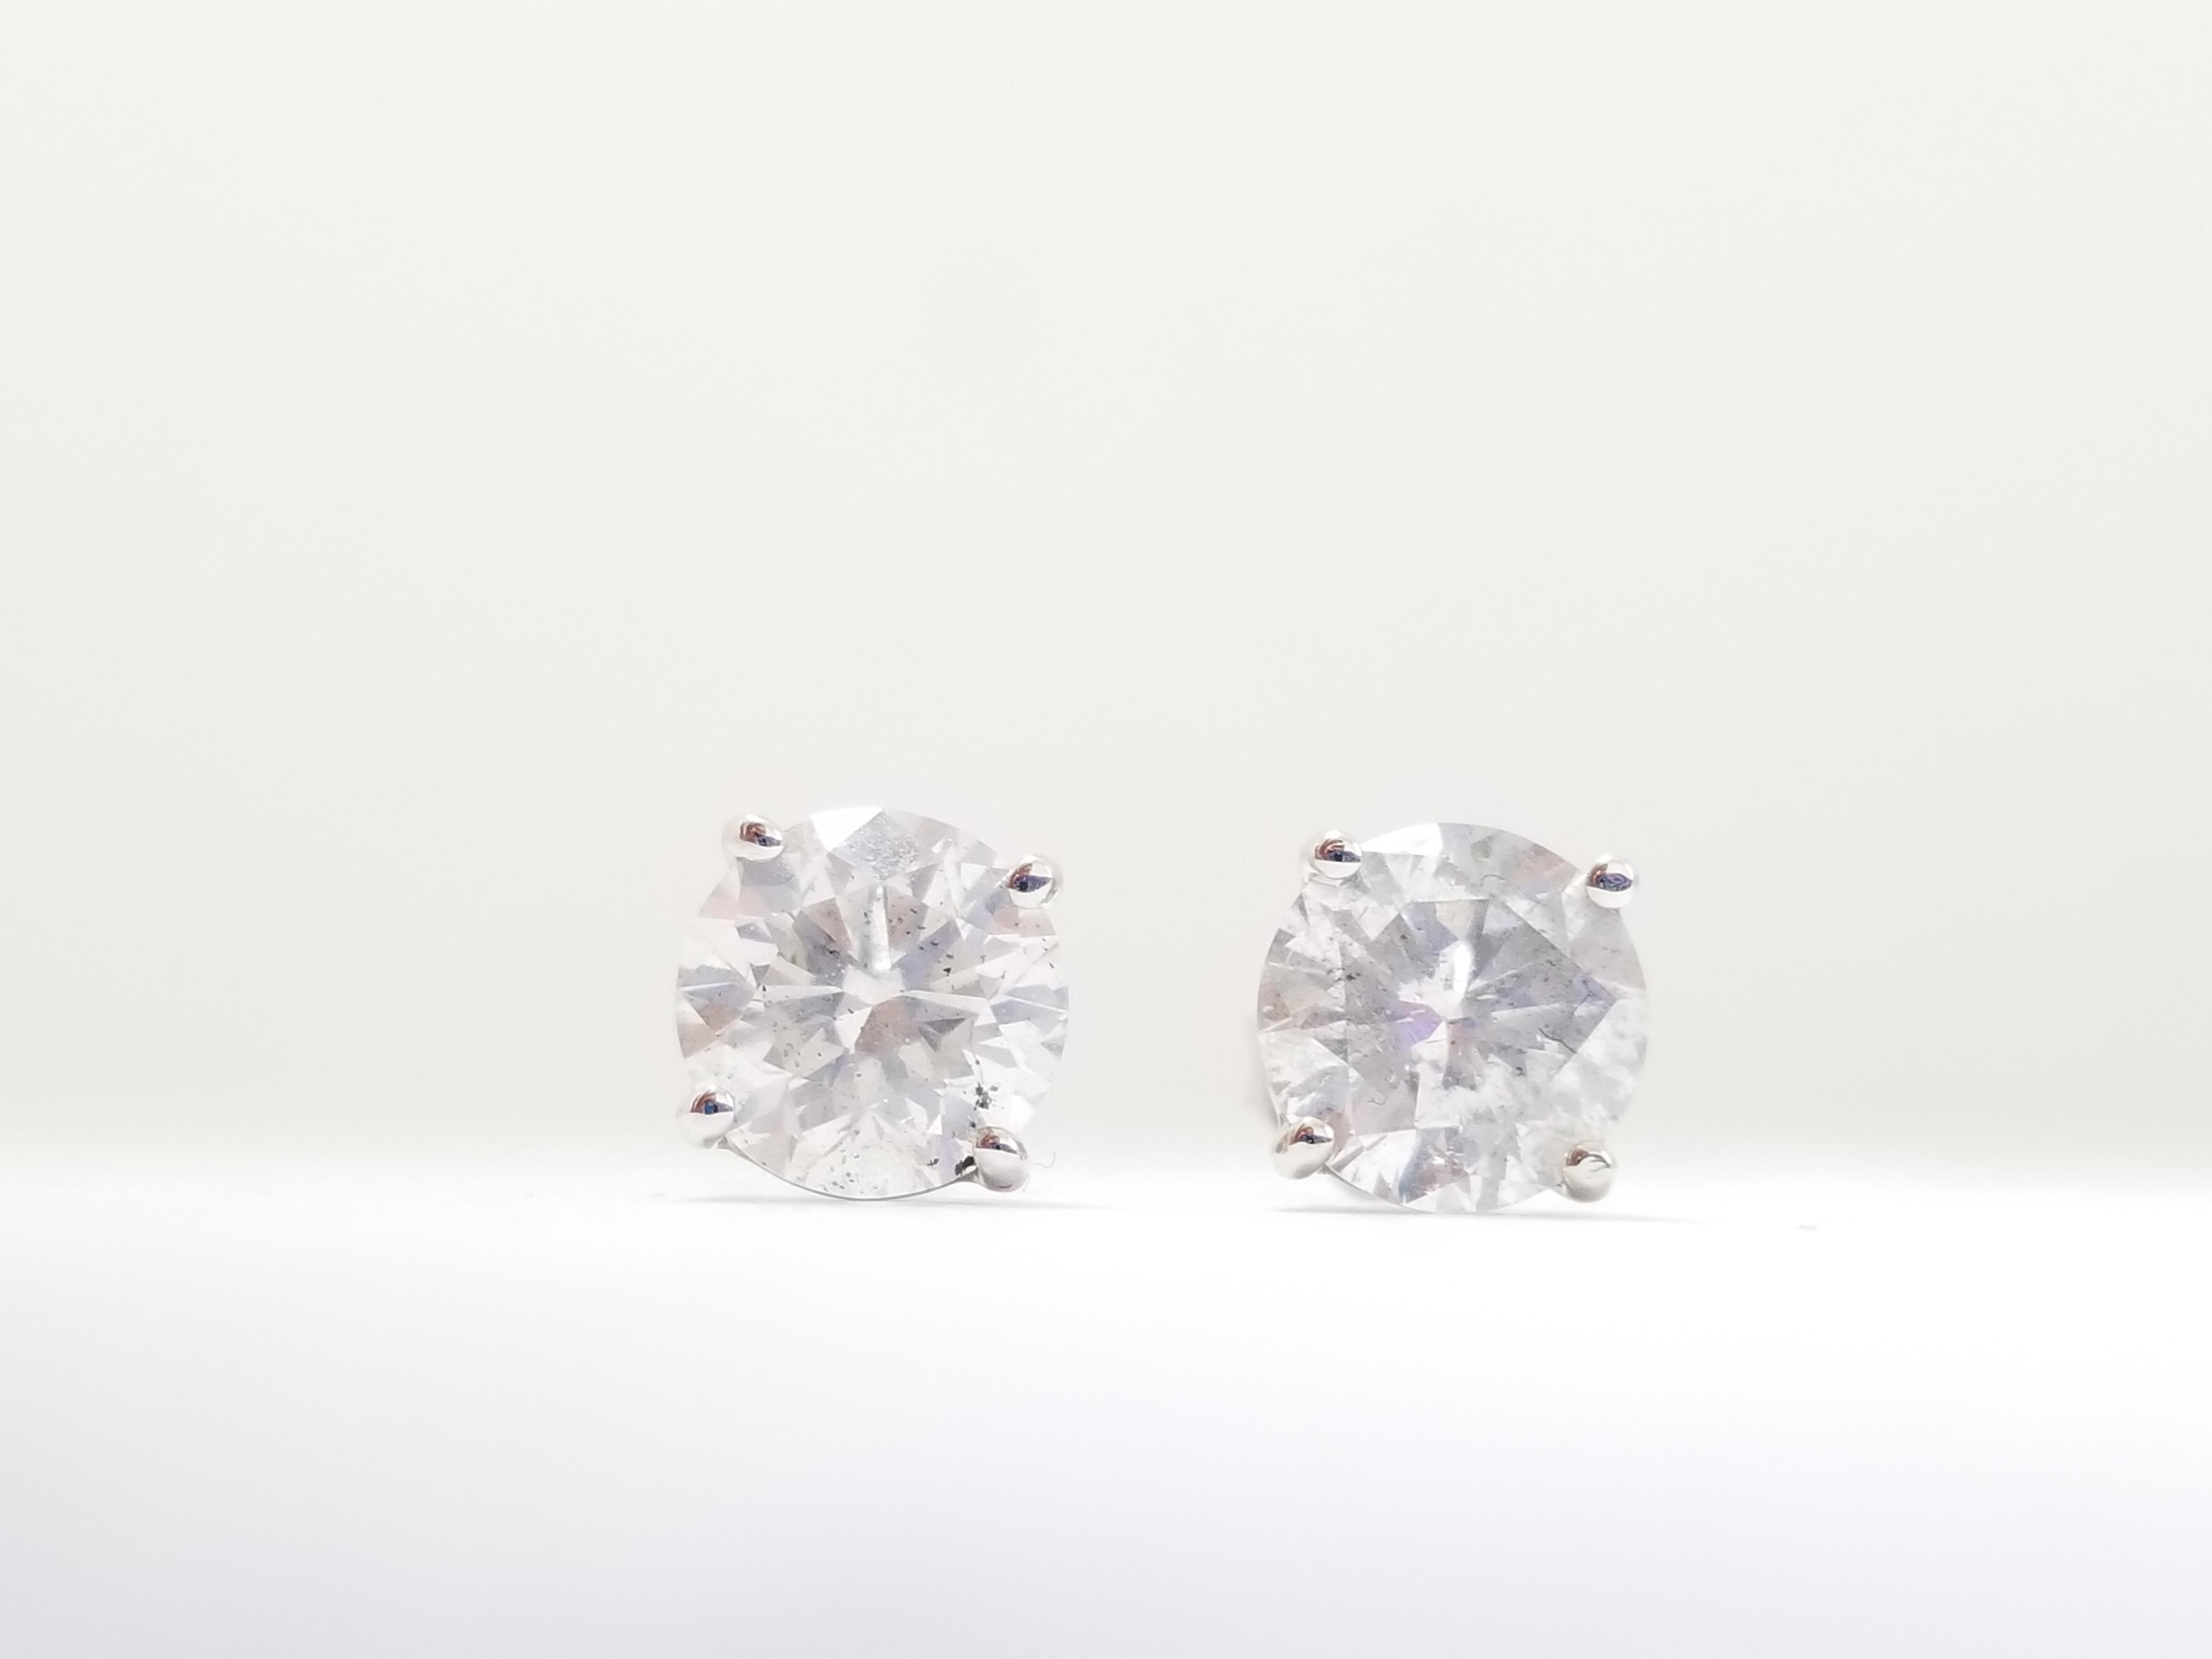 Natural Round Diamond Studs set in 4 prong push back 14k white gold GIA 1.08 Carat Diamond + GIA 1.08 Carat Diamond. 2.16 cttw.

GIA 1.08ct Color H Clarity I2 
GIA 1.08ct Color J Clarity I3